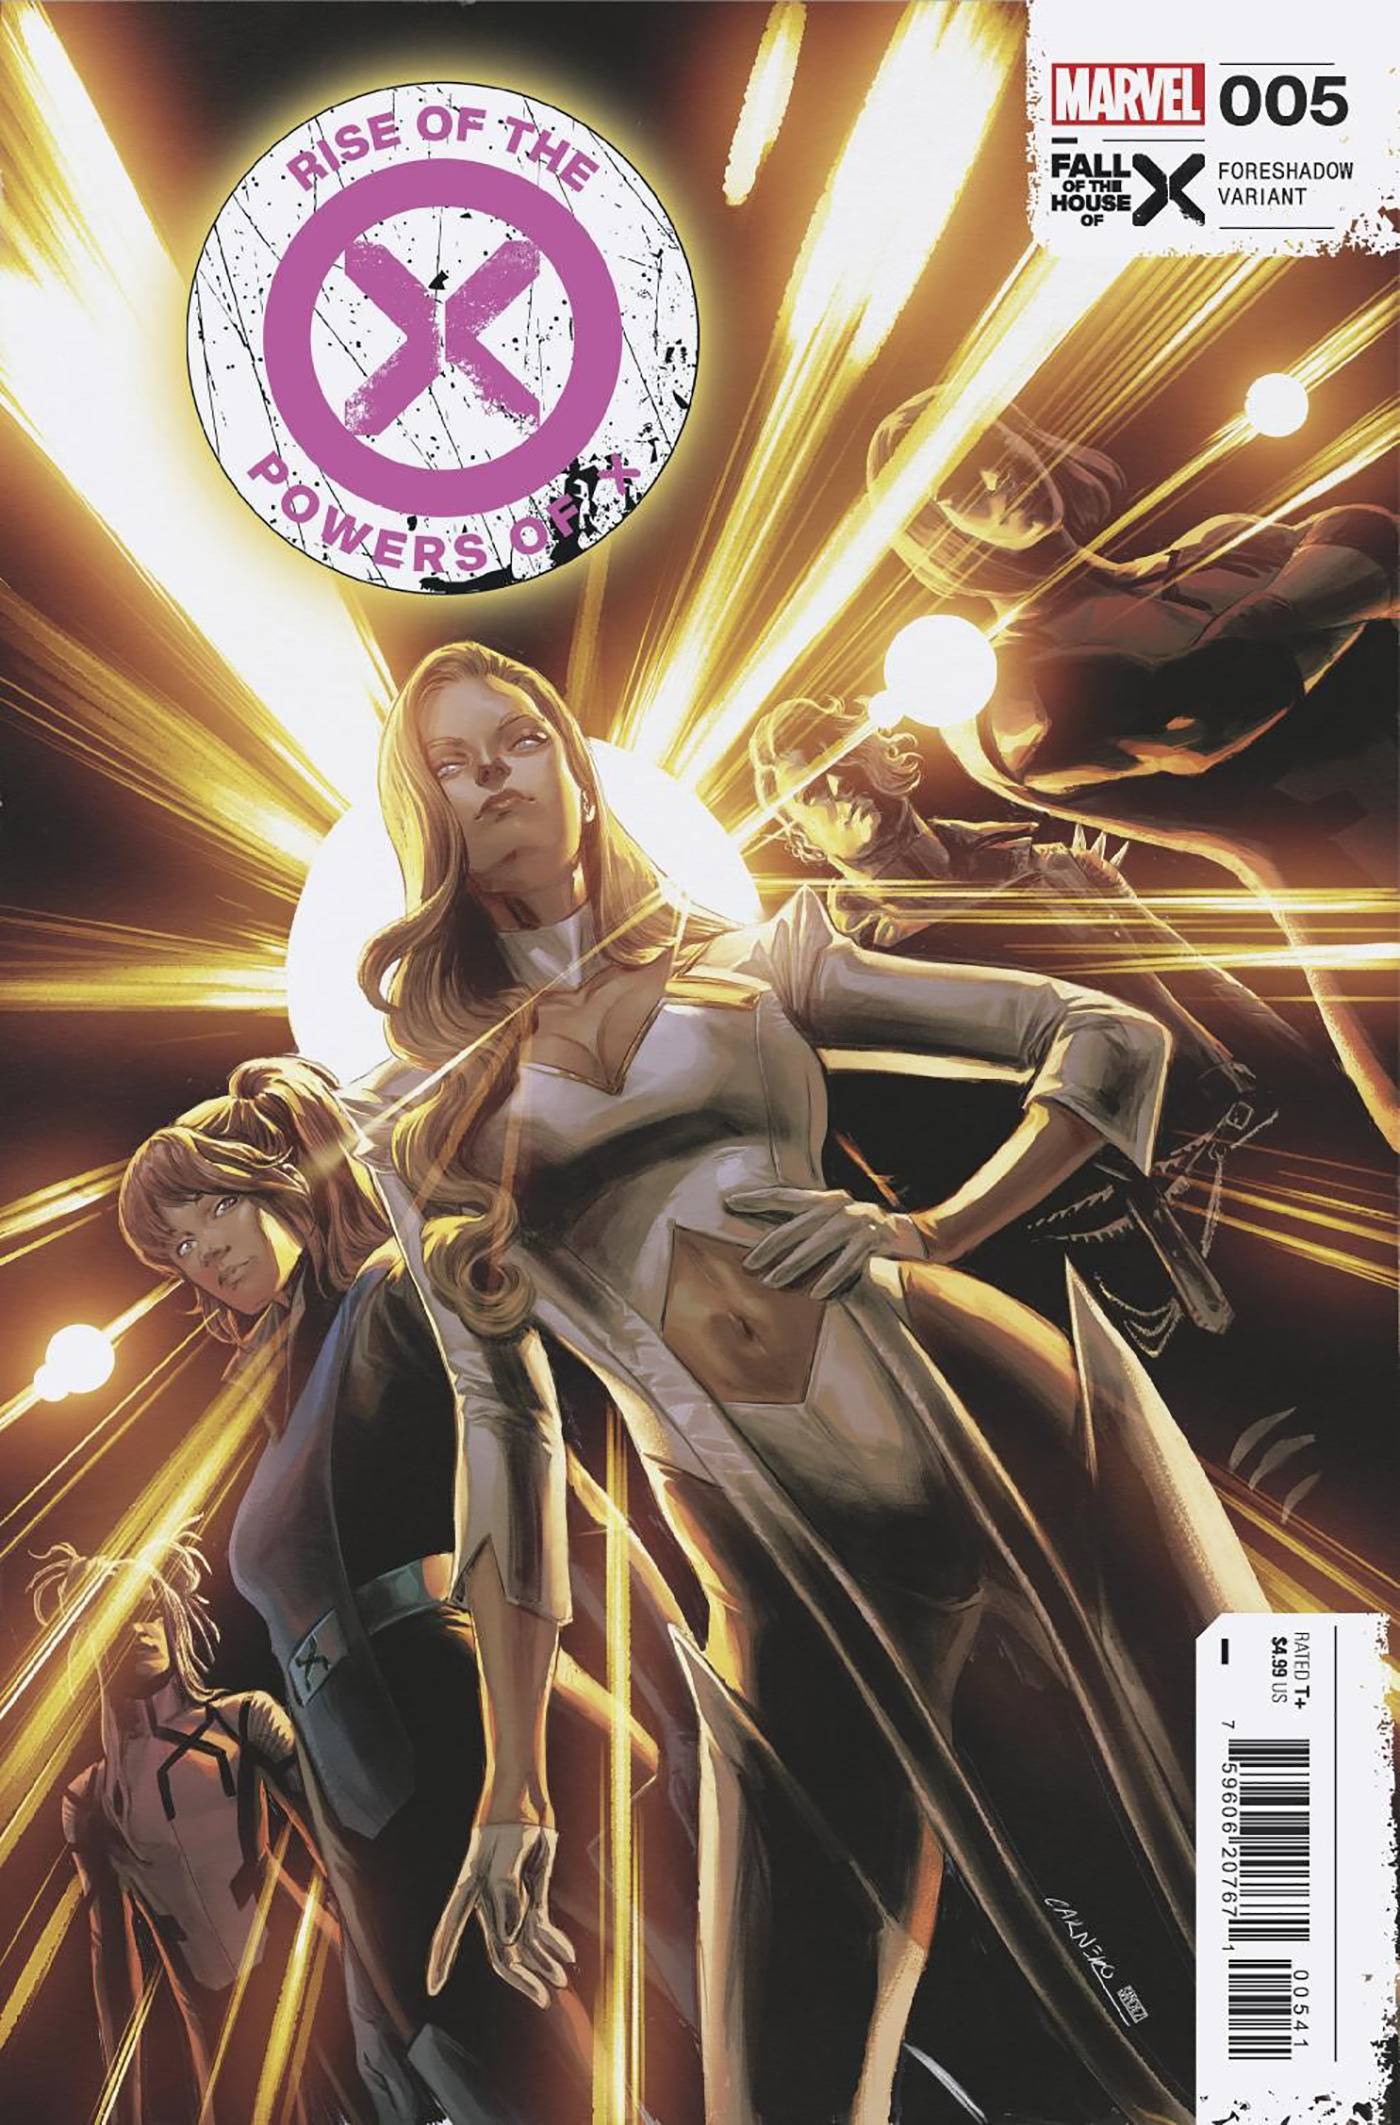 Rise Powers Of X #5 D MARVEL Carnero Foreshadow 05/29/2024 | BD Cosmos